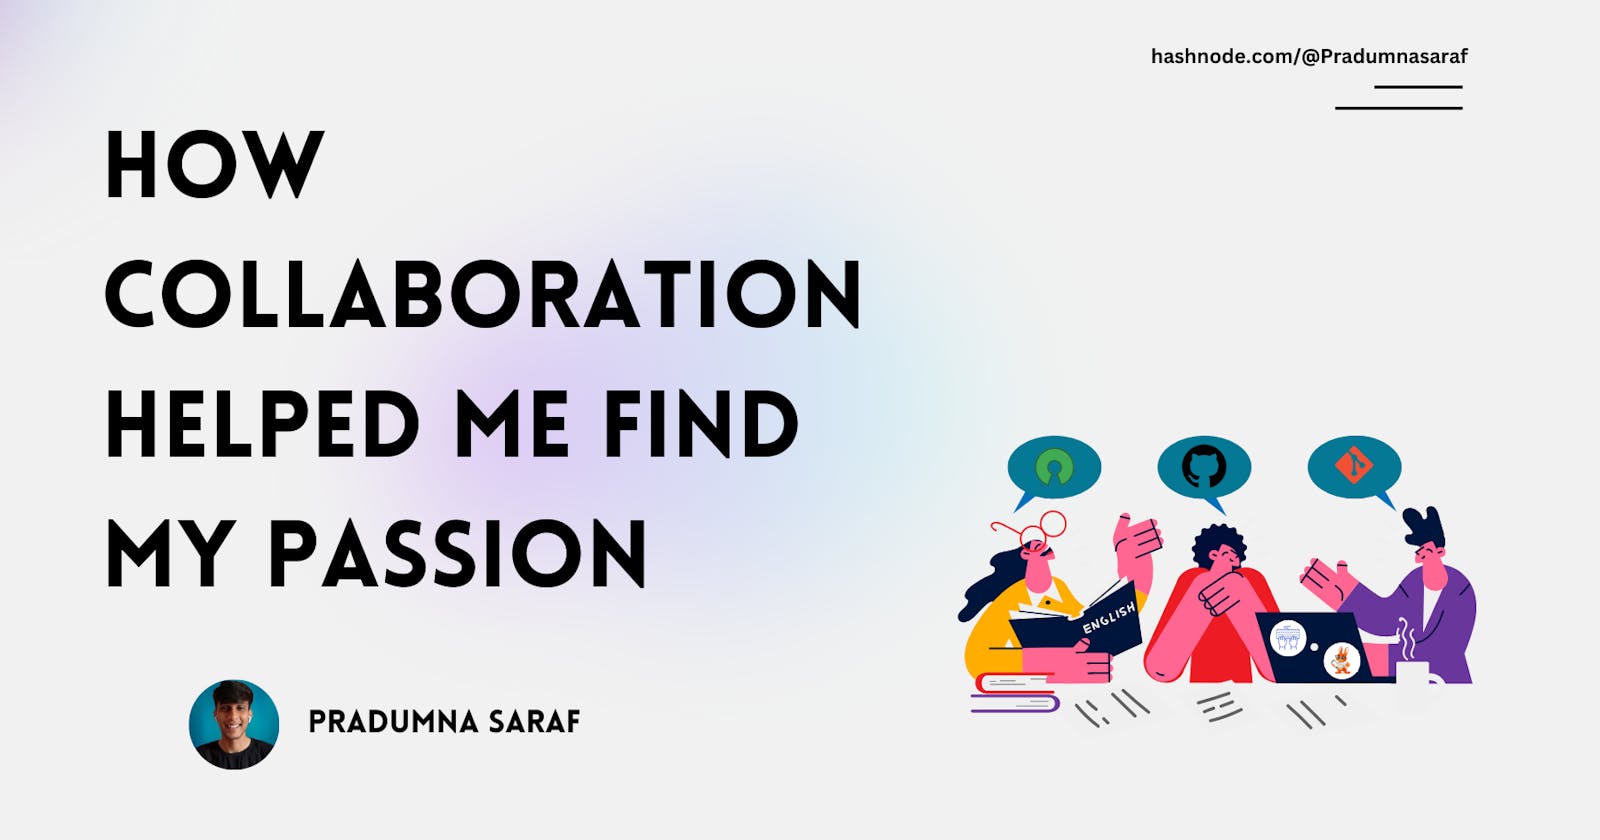 How collaboration helped me find my passion